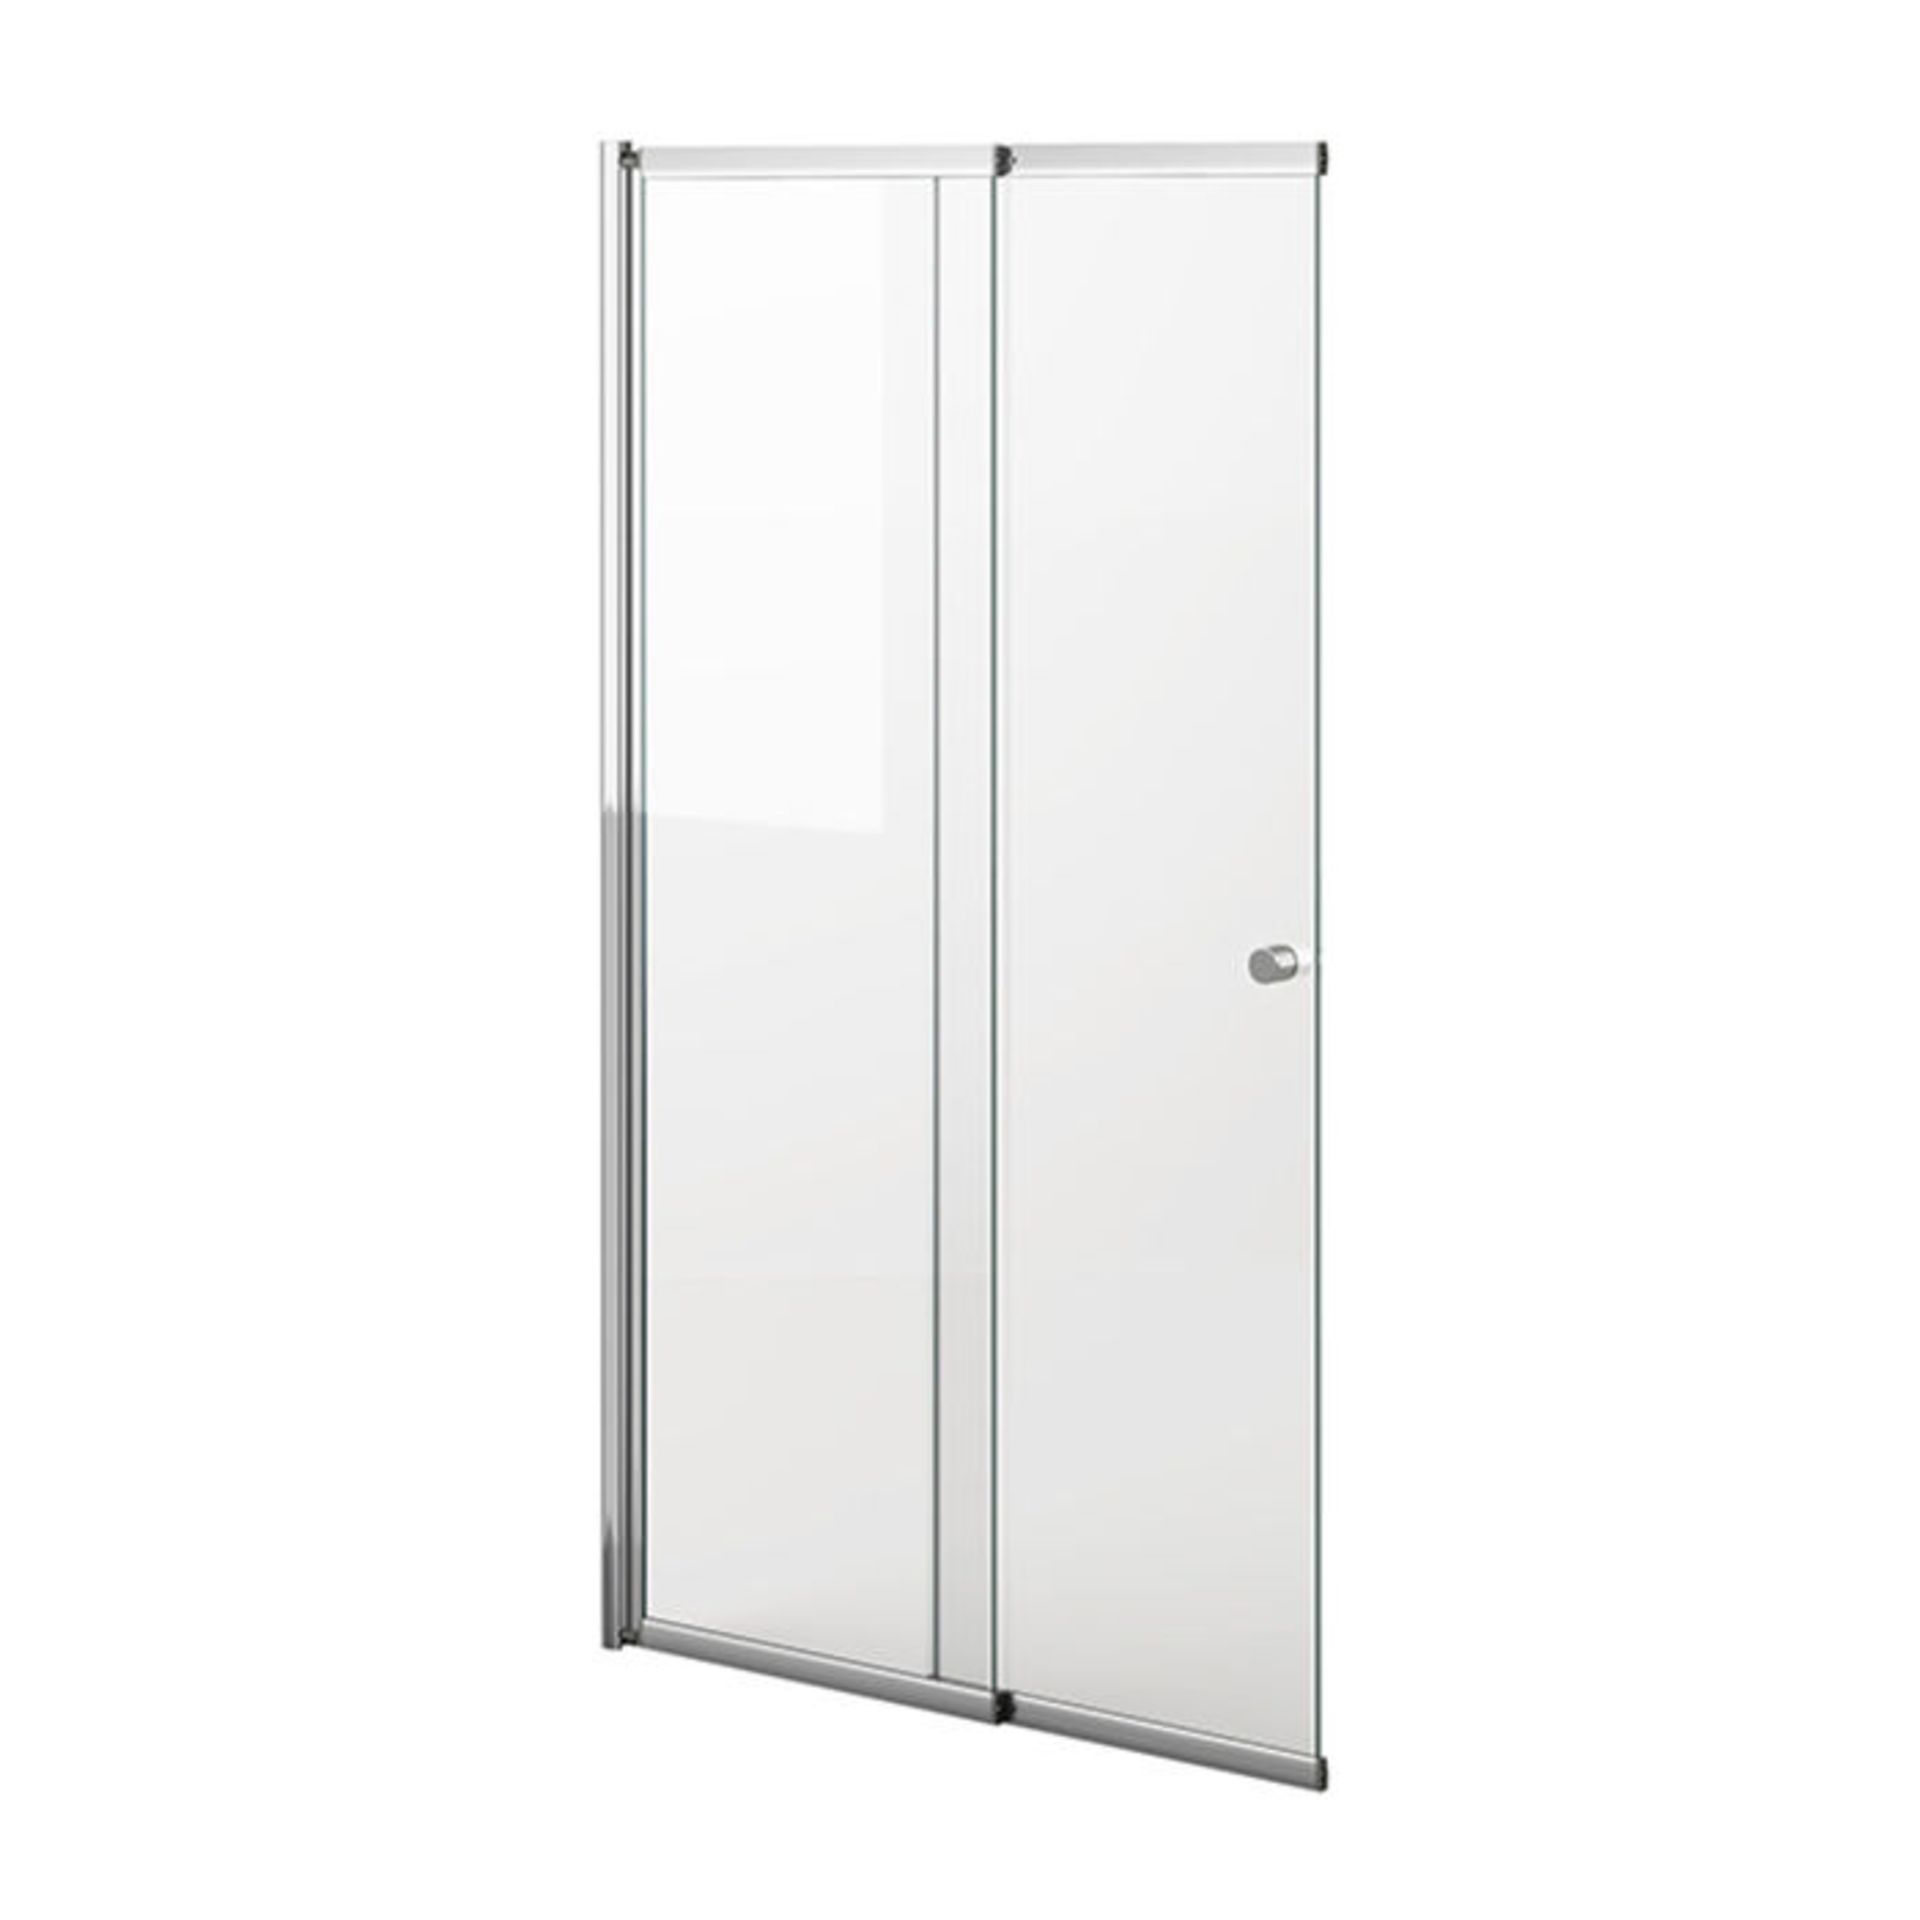 (MC202) 820mm Sliding Bath Screen. RRP £189.00. Constructed of 4mm lightweight tempered safety glass